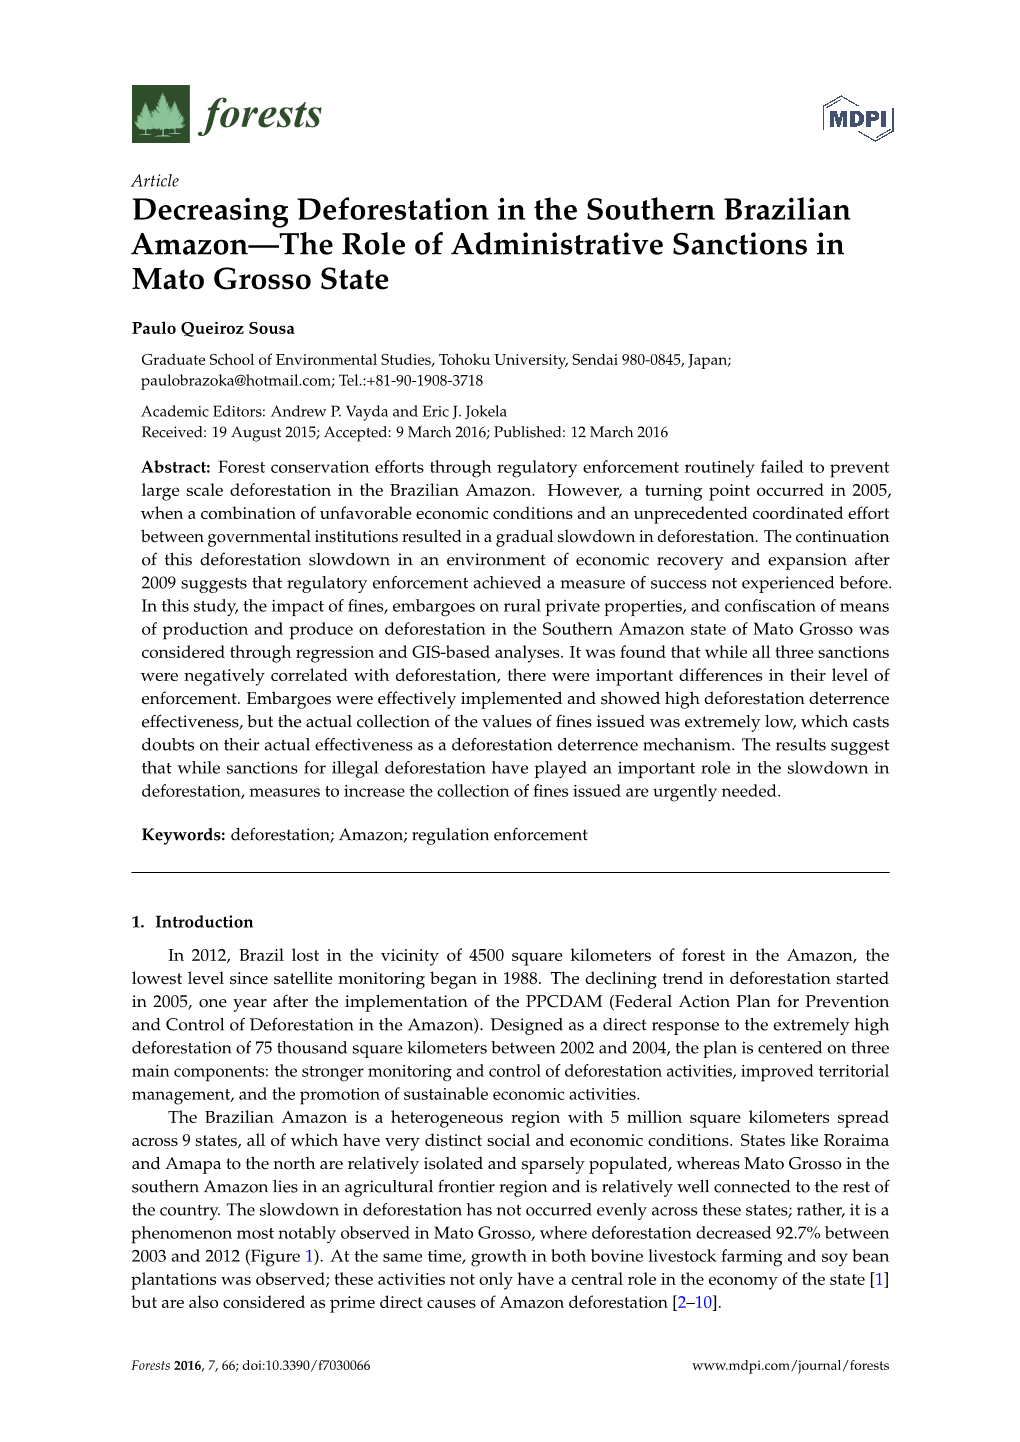 Decreasing Deforestation in the Southern Brazilian Amazon—The Role of Administrative Sanctions in Mato Grosso State